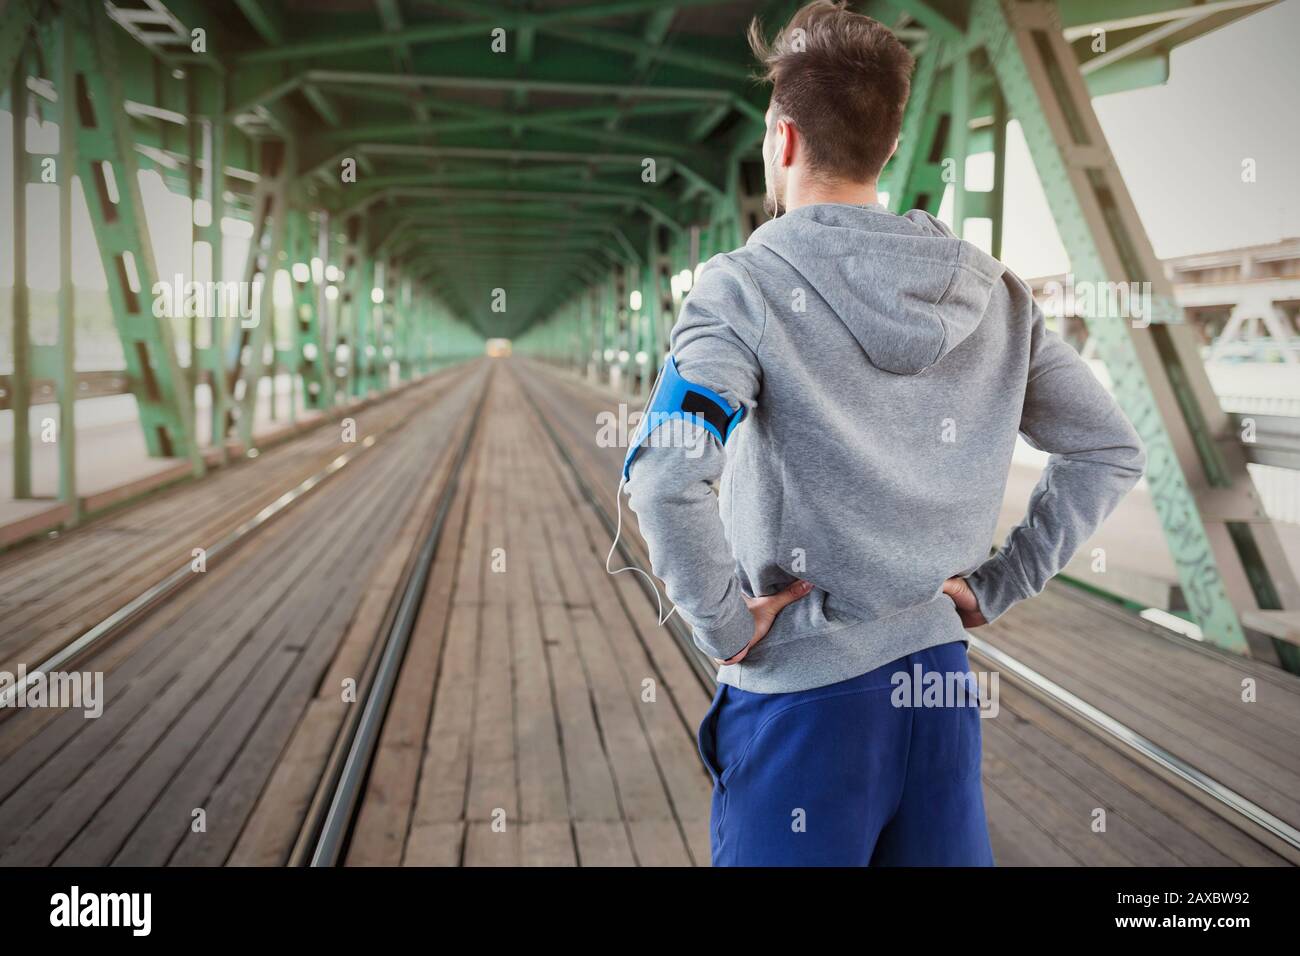 Young male runner standing on train tracks with hands on hips Stock Photo